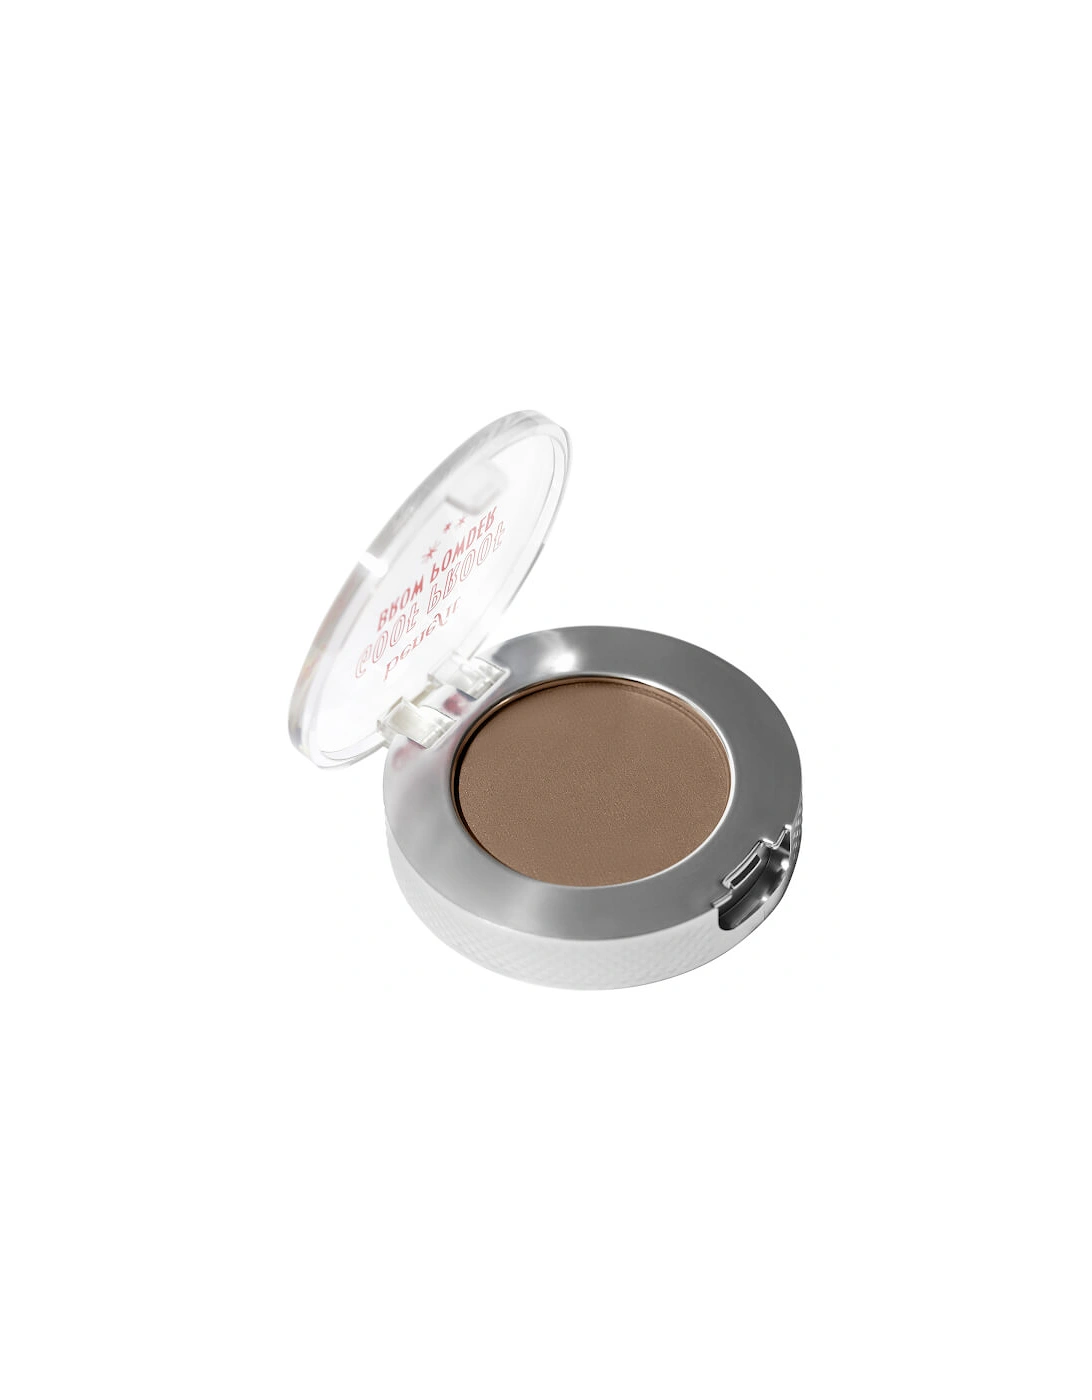 Goof Proof Easy Brow Filling Powder - 03 Warm Light Blonde, 2 of 1